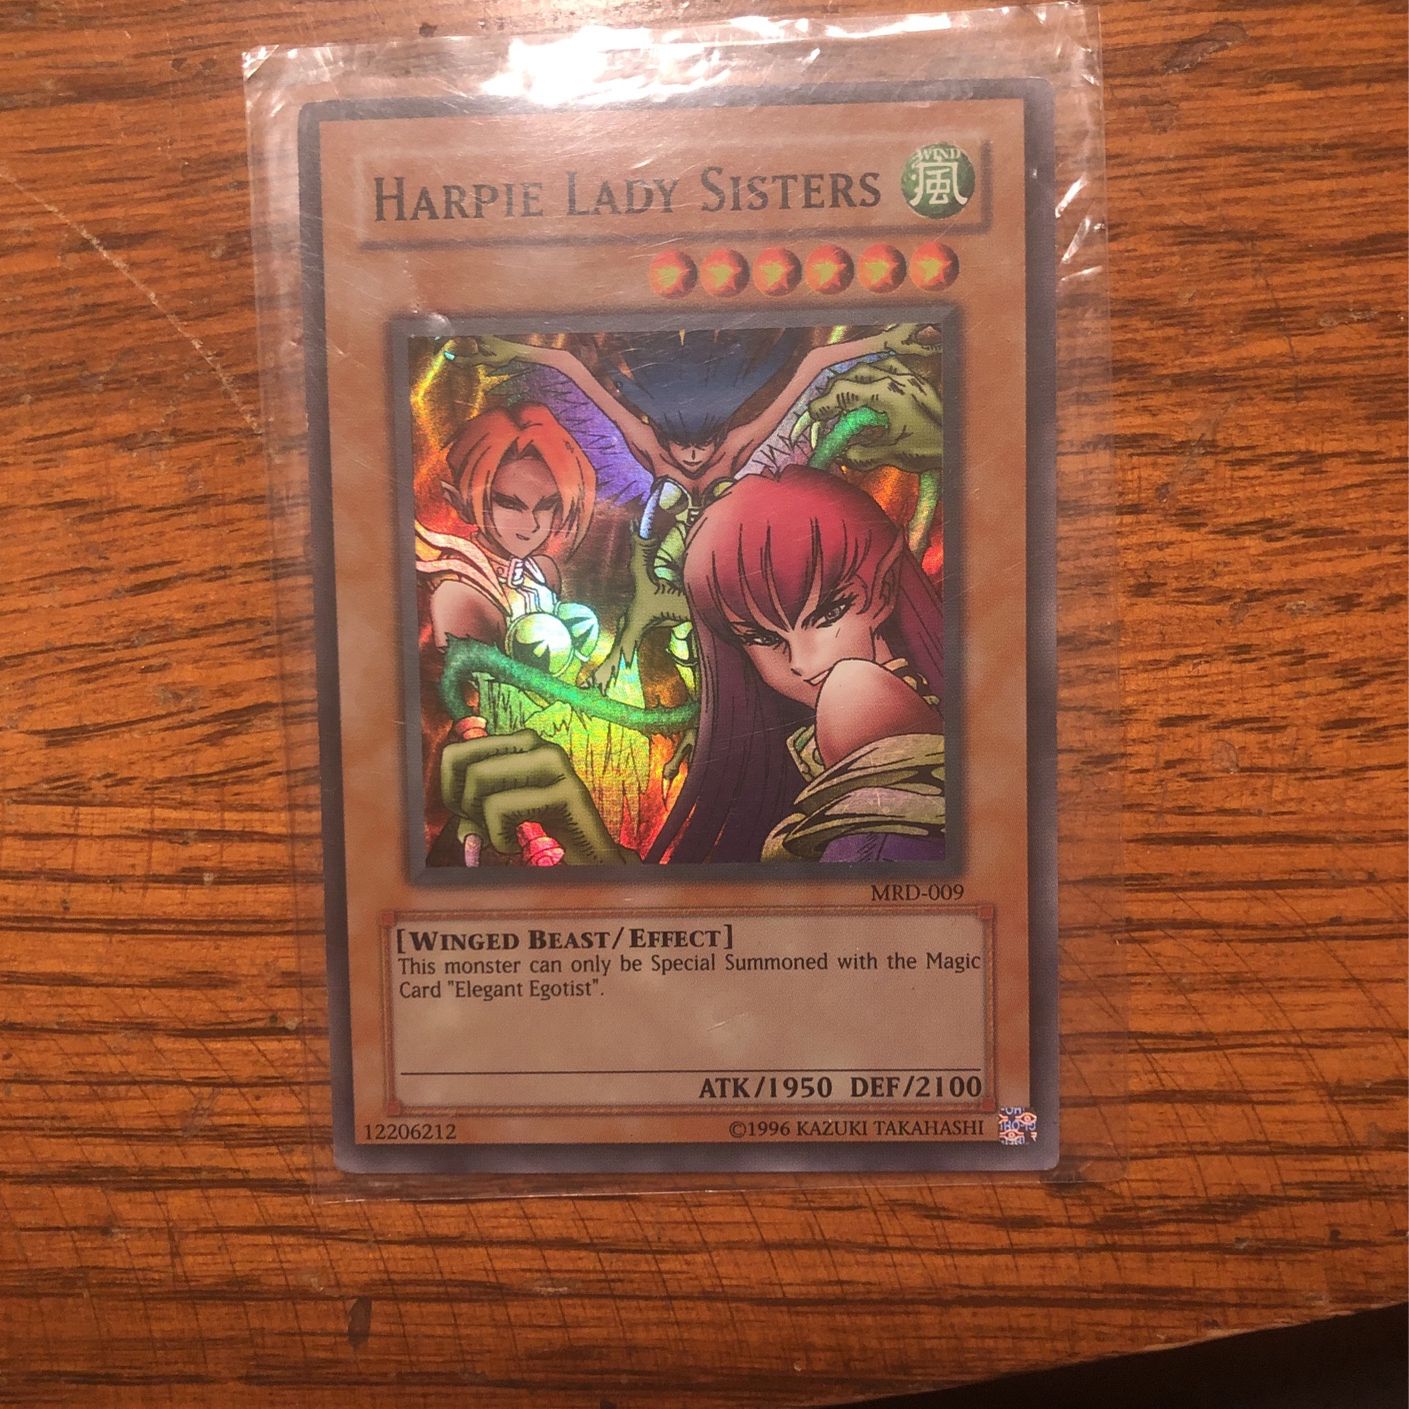 Harpy Lady Sisters Holographic Yugioh Card